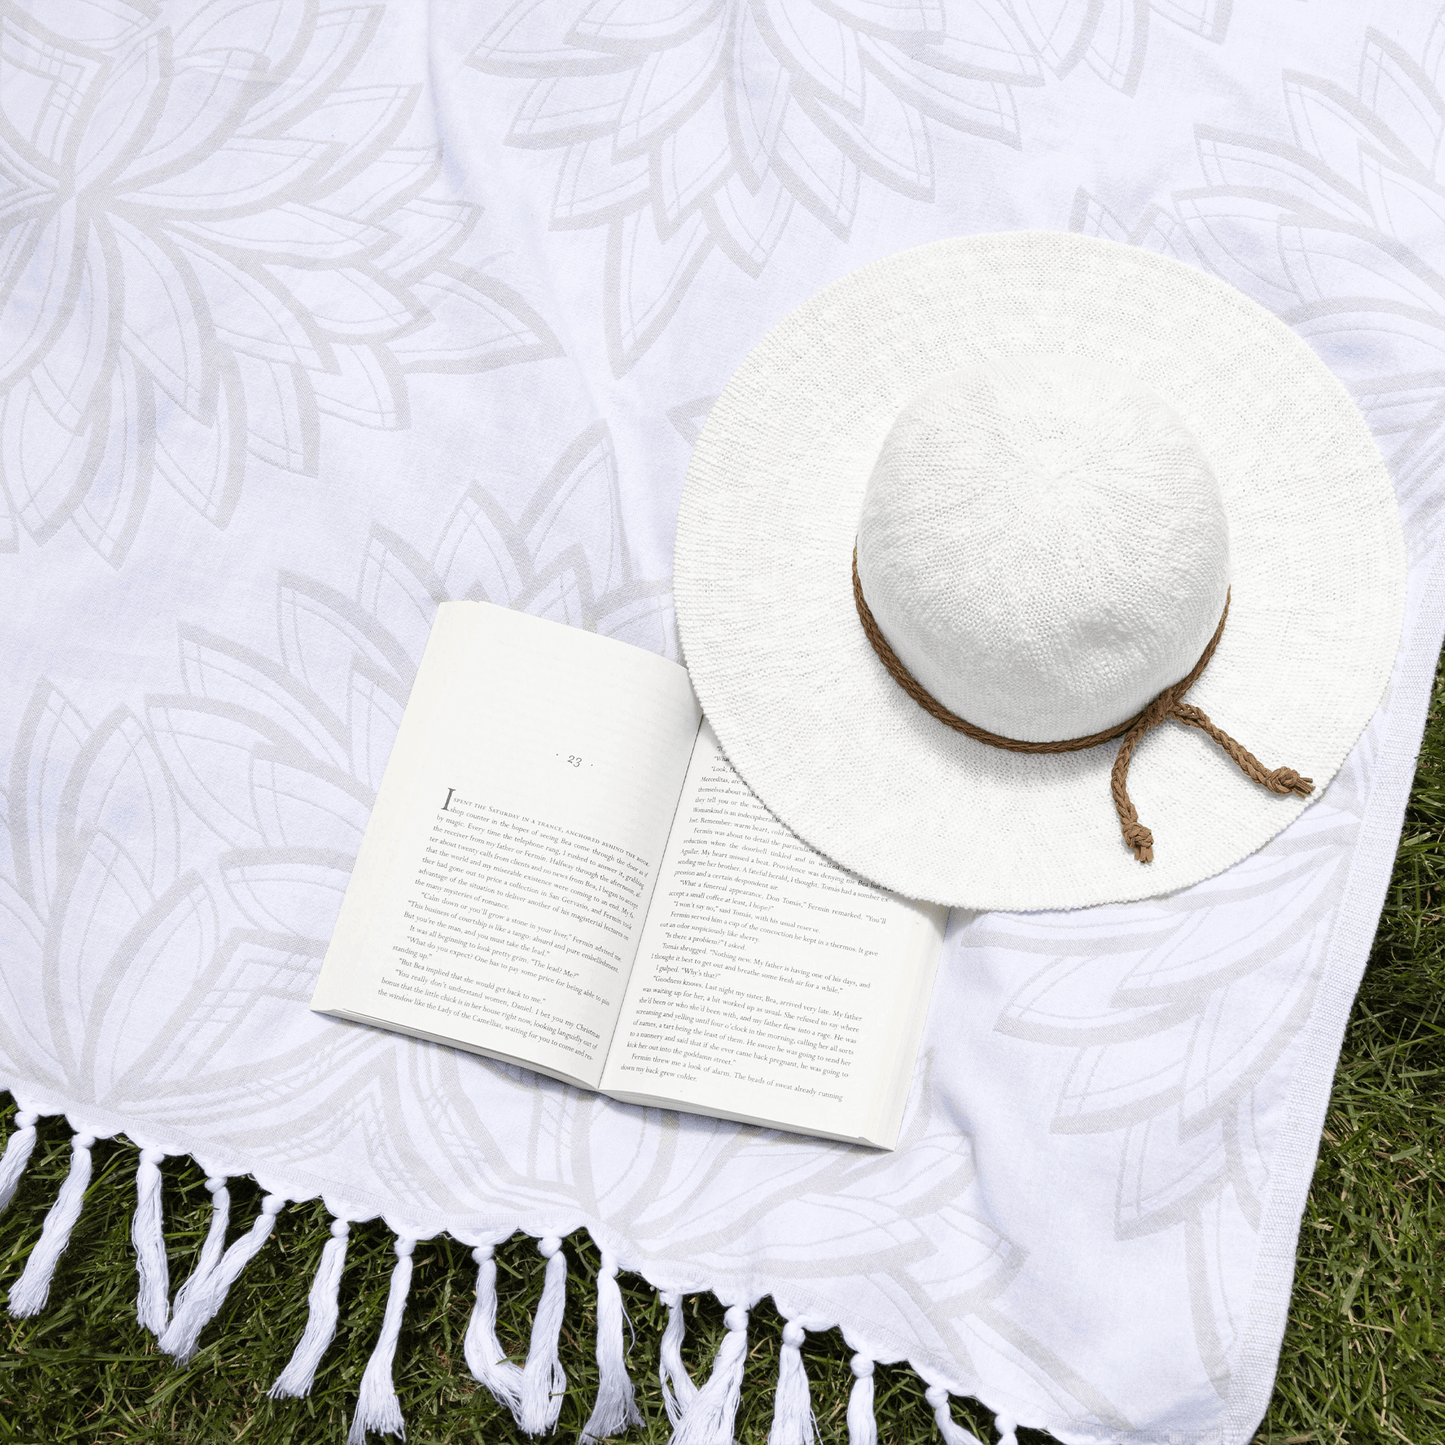 Grey and white Turkish towel with sunhat and book on the summer grass